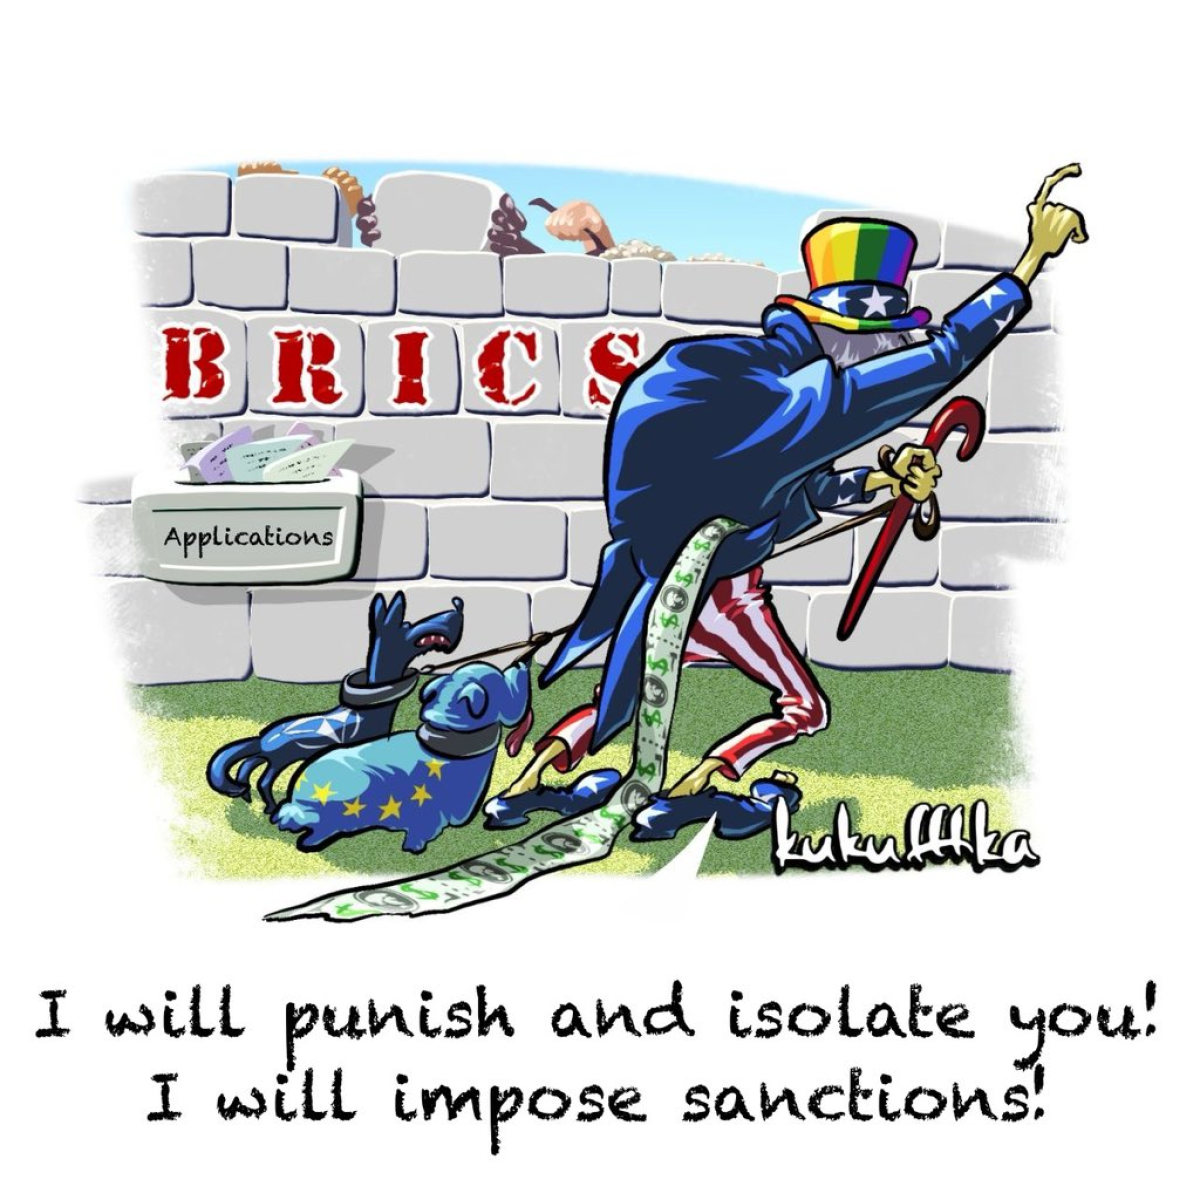 I will punish and isolate you! I will impose sanctions!